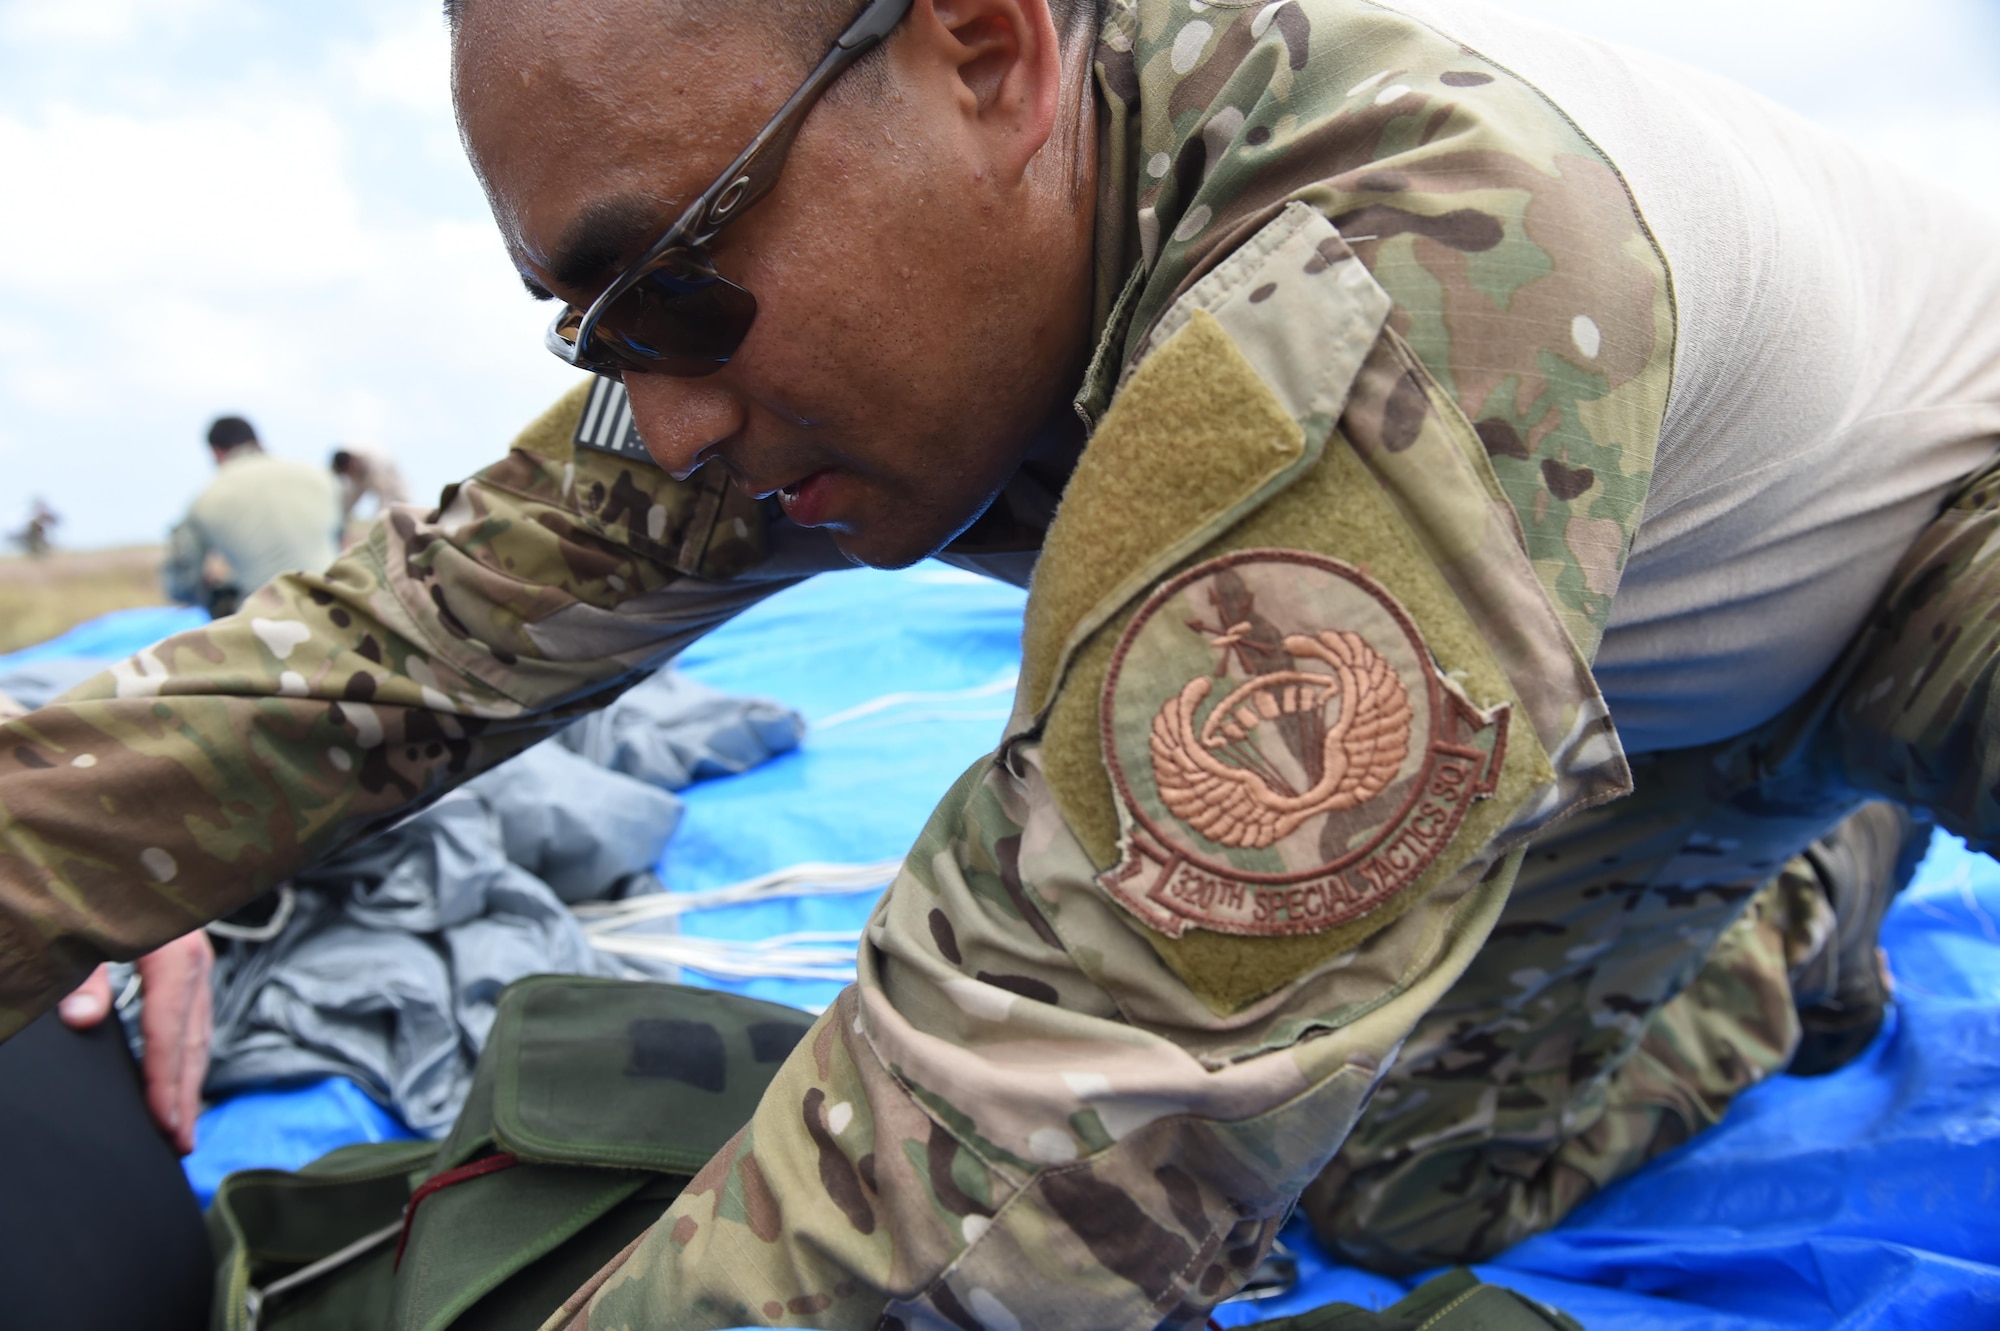 A parachute rigger with the 320th Special Tactics Squadron re-packs a parachute after a multi-aircraft, joint airborne operation with special operations assets and conventional forces from all four branches of the U.S. Armed Forces as part of Rim of the Pacific (RIMPAC) 2016 to strengthen their relationships and interoperability with their partners, Pohakuloa Training Area, Hawaii, July 14, 2016. The world's largest international maritime exercise, RIMPAC provides a unique training opportunity that helps participants foster and sustain the cooperative relationships that are critical to ensuring the safety of sea lanes and security on the world's oceans. (U.S. Air Force photo by 2nd Lt. Jaclyn Pienkowski/Released)